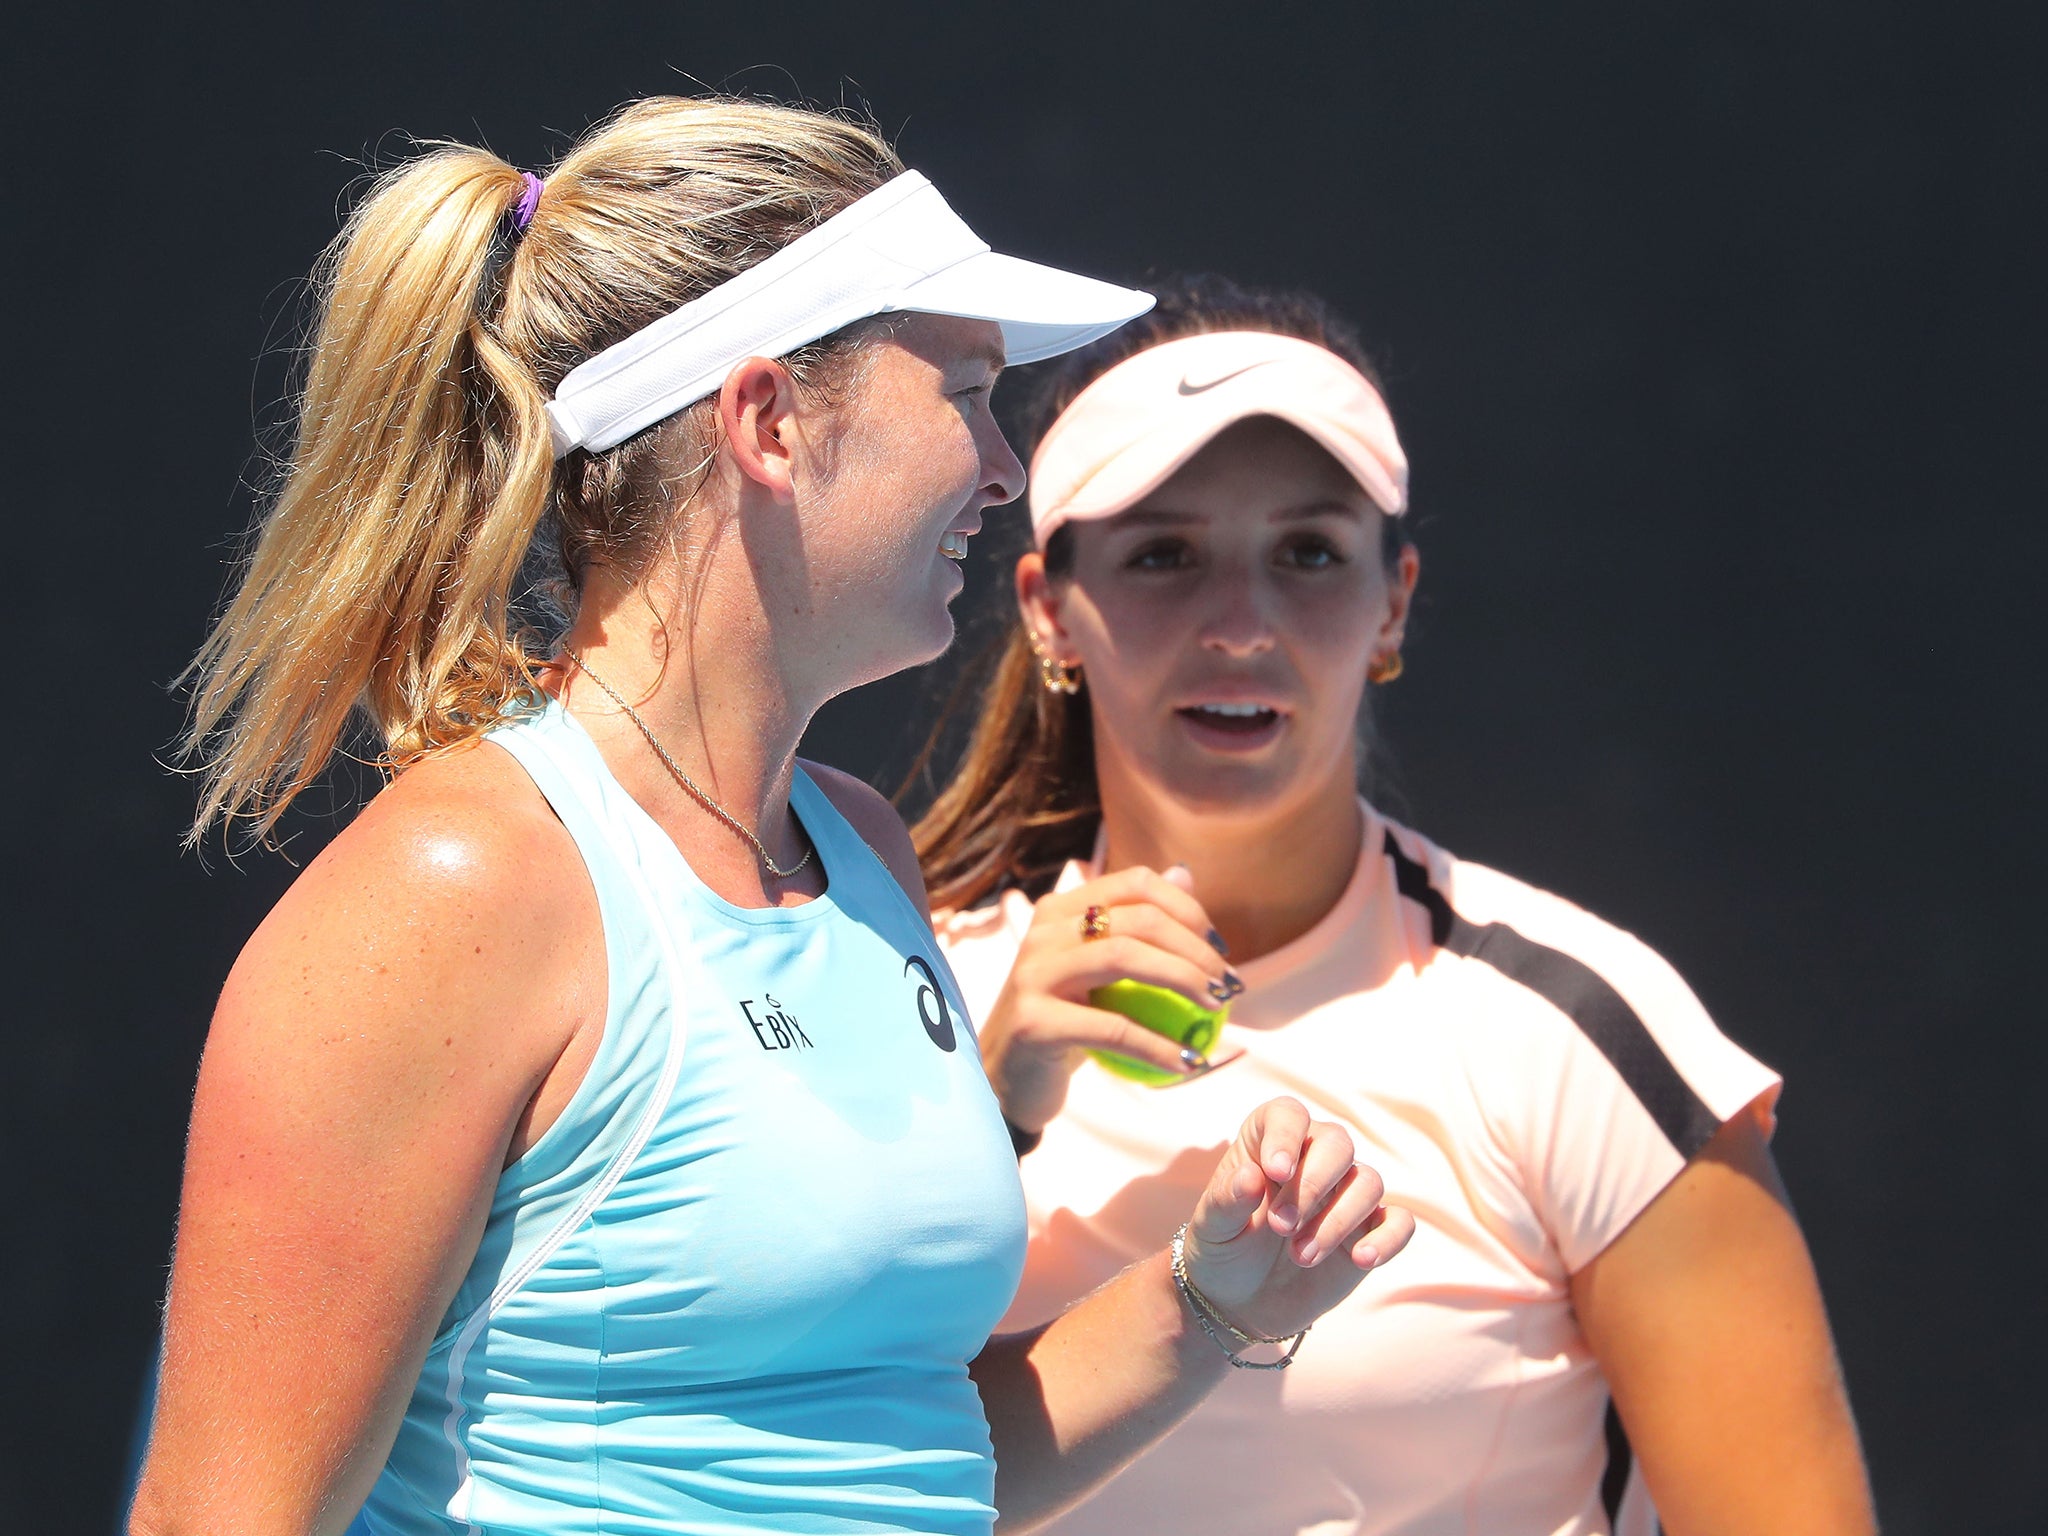 Robson and Coco Vandeweghe suffered a 7-6, 6-4 defeat by Chan Hao-ching and Katarina Srebotnik